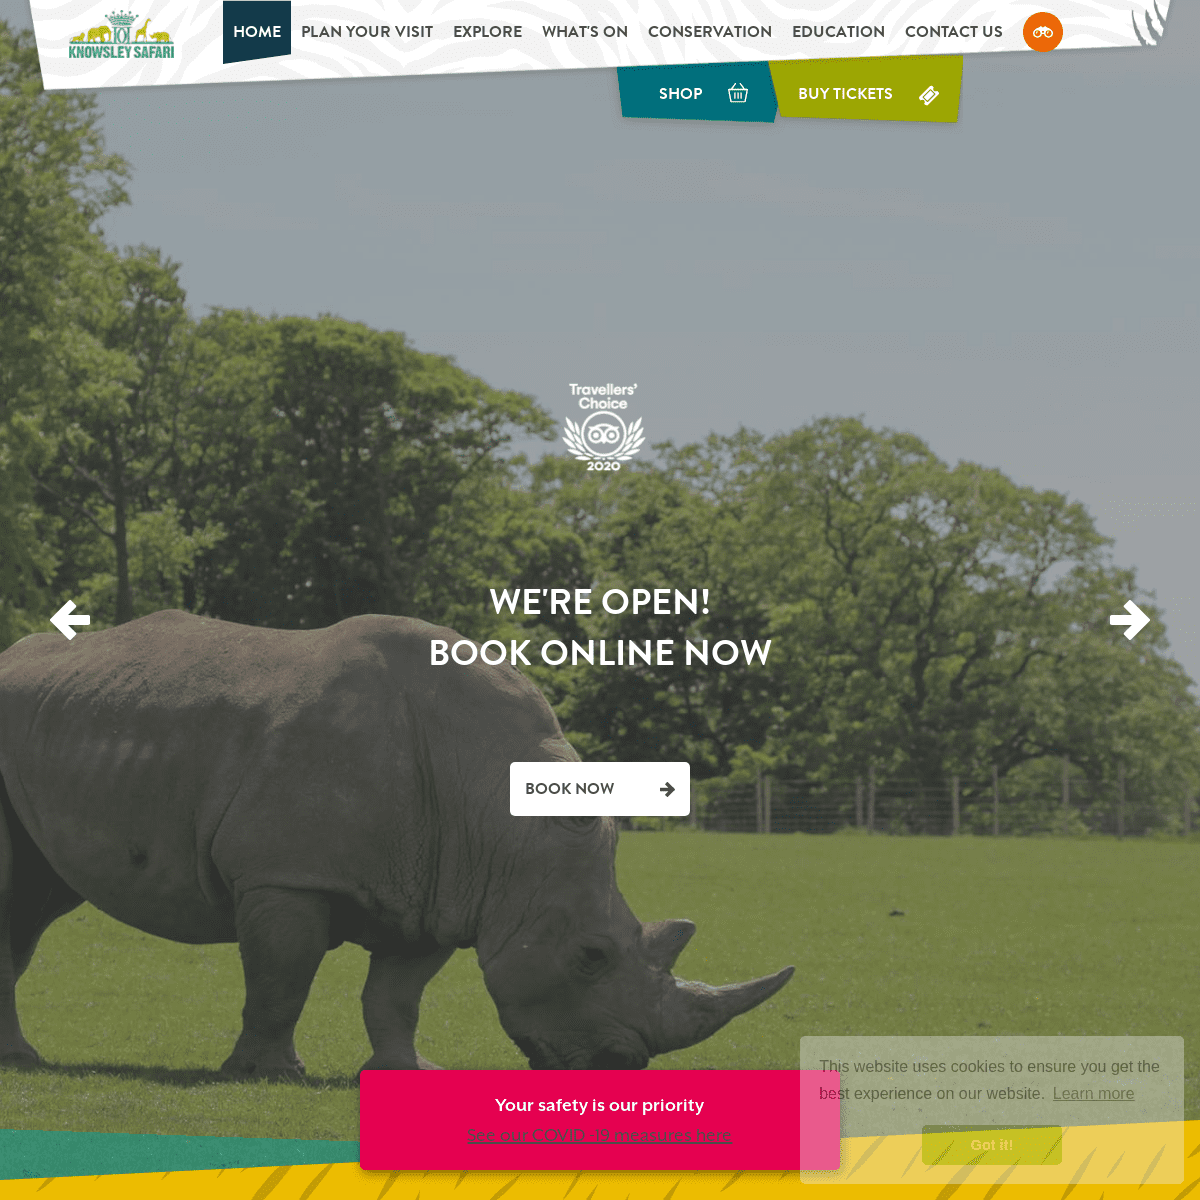 A complete backup of https://knowsleysafariexperience.co.uk